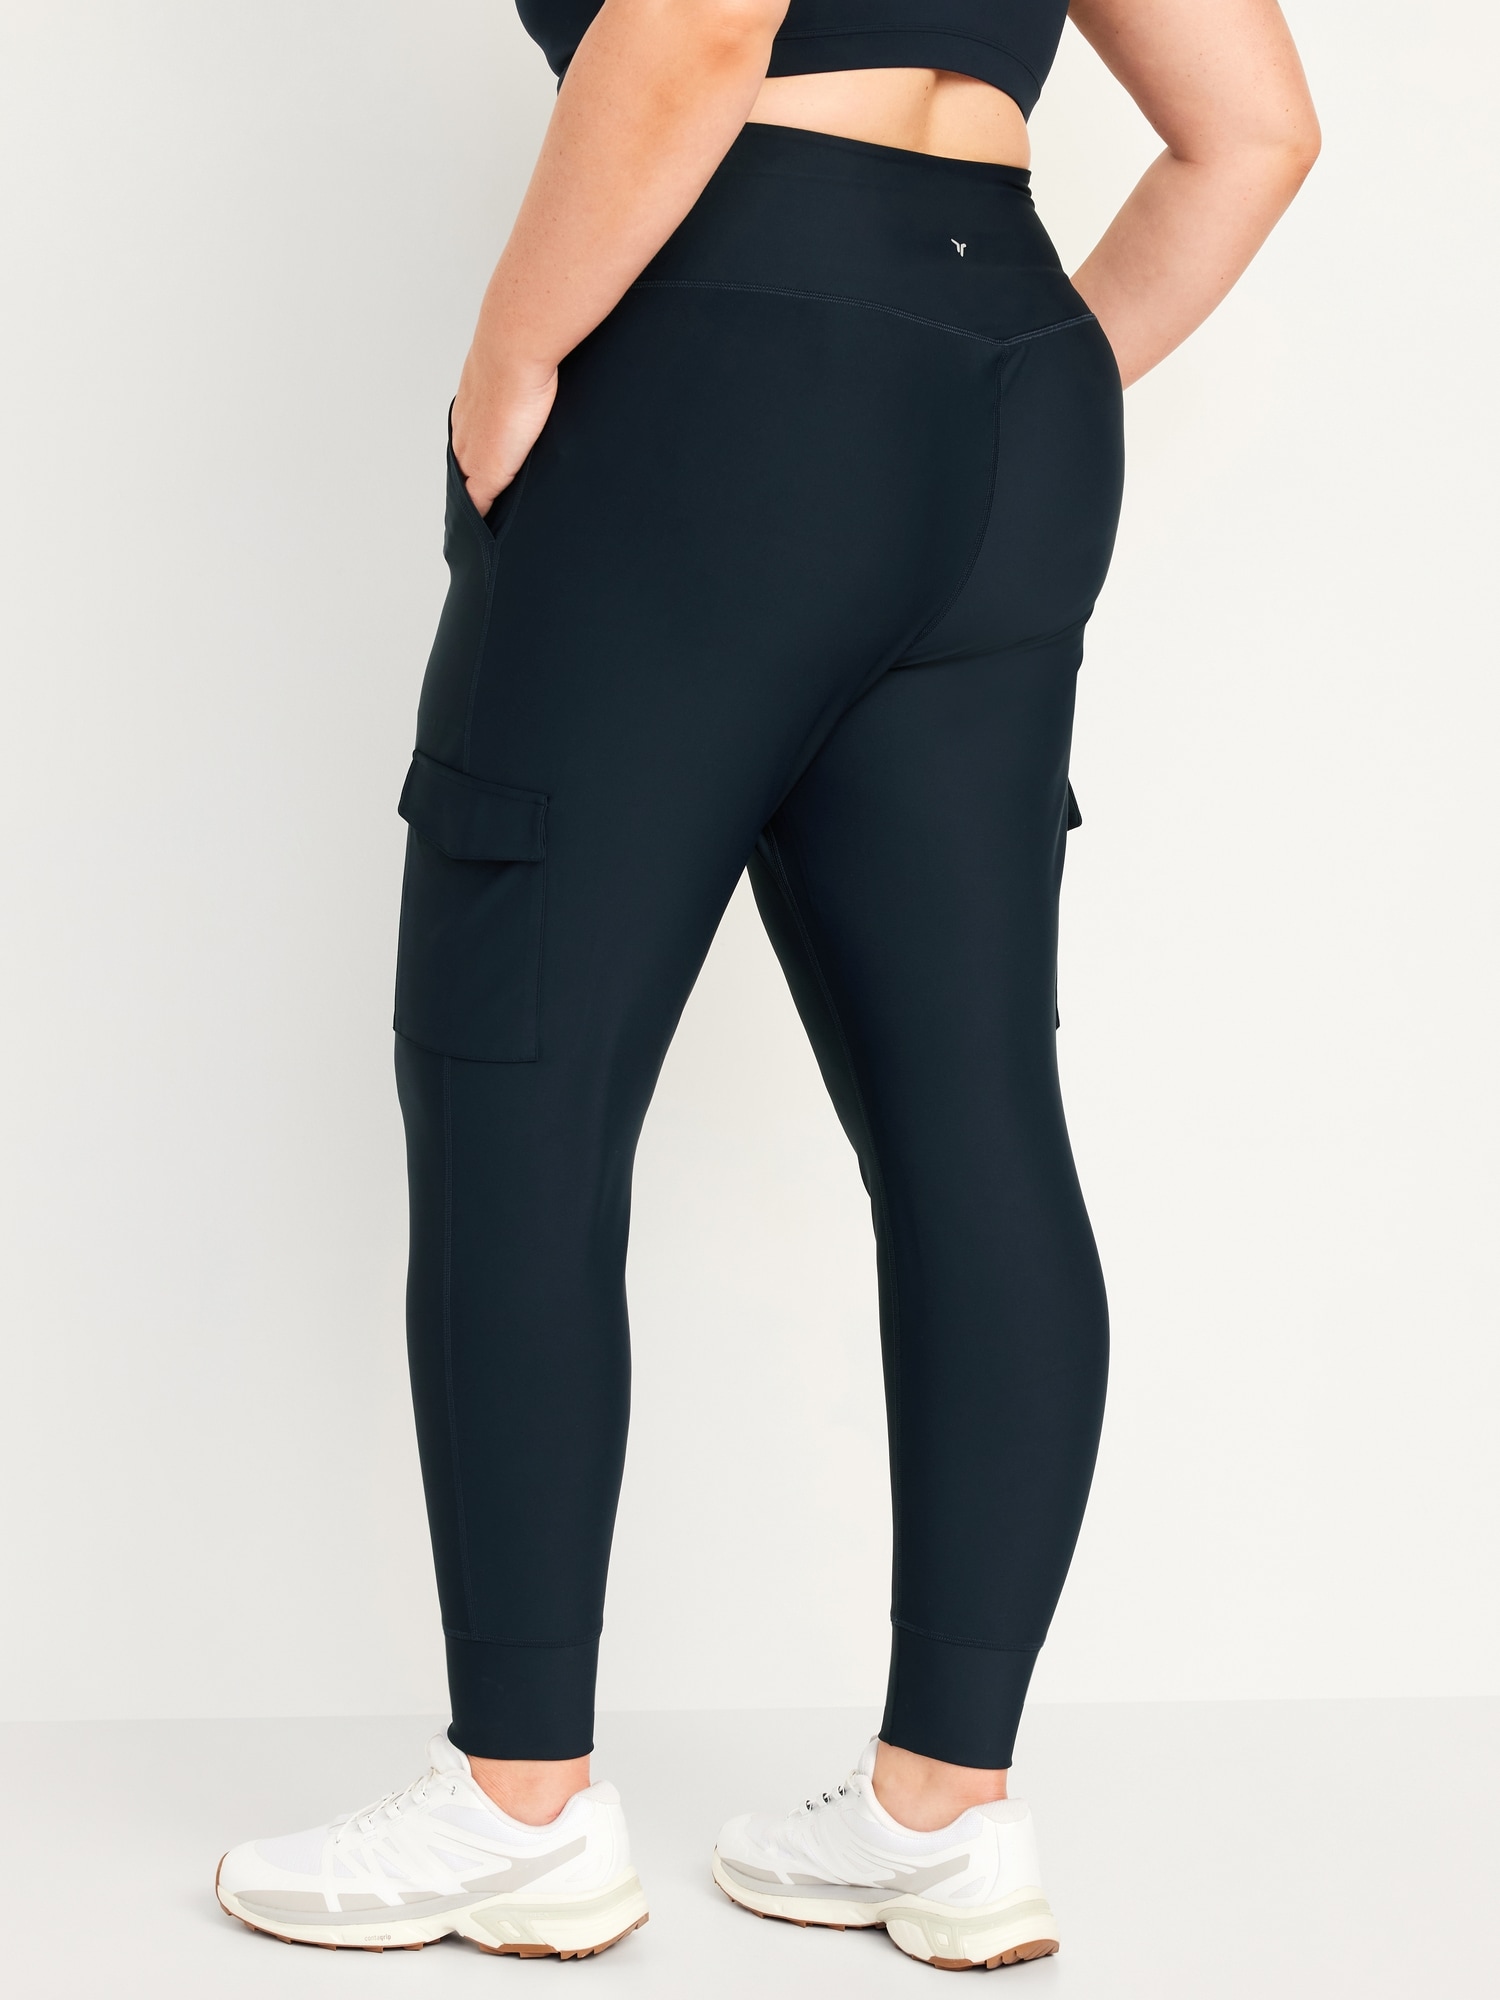  Cargo Sweatpants for Women Tall Petite high Waisted